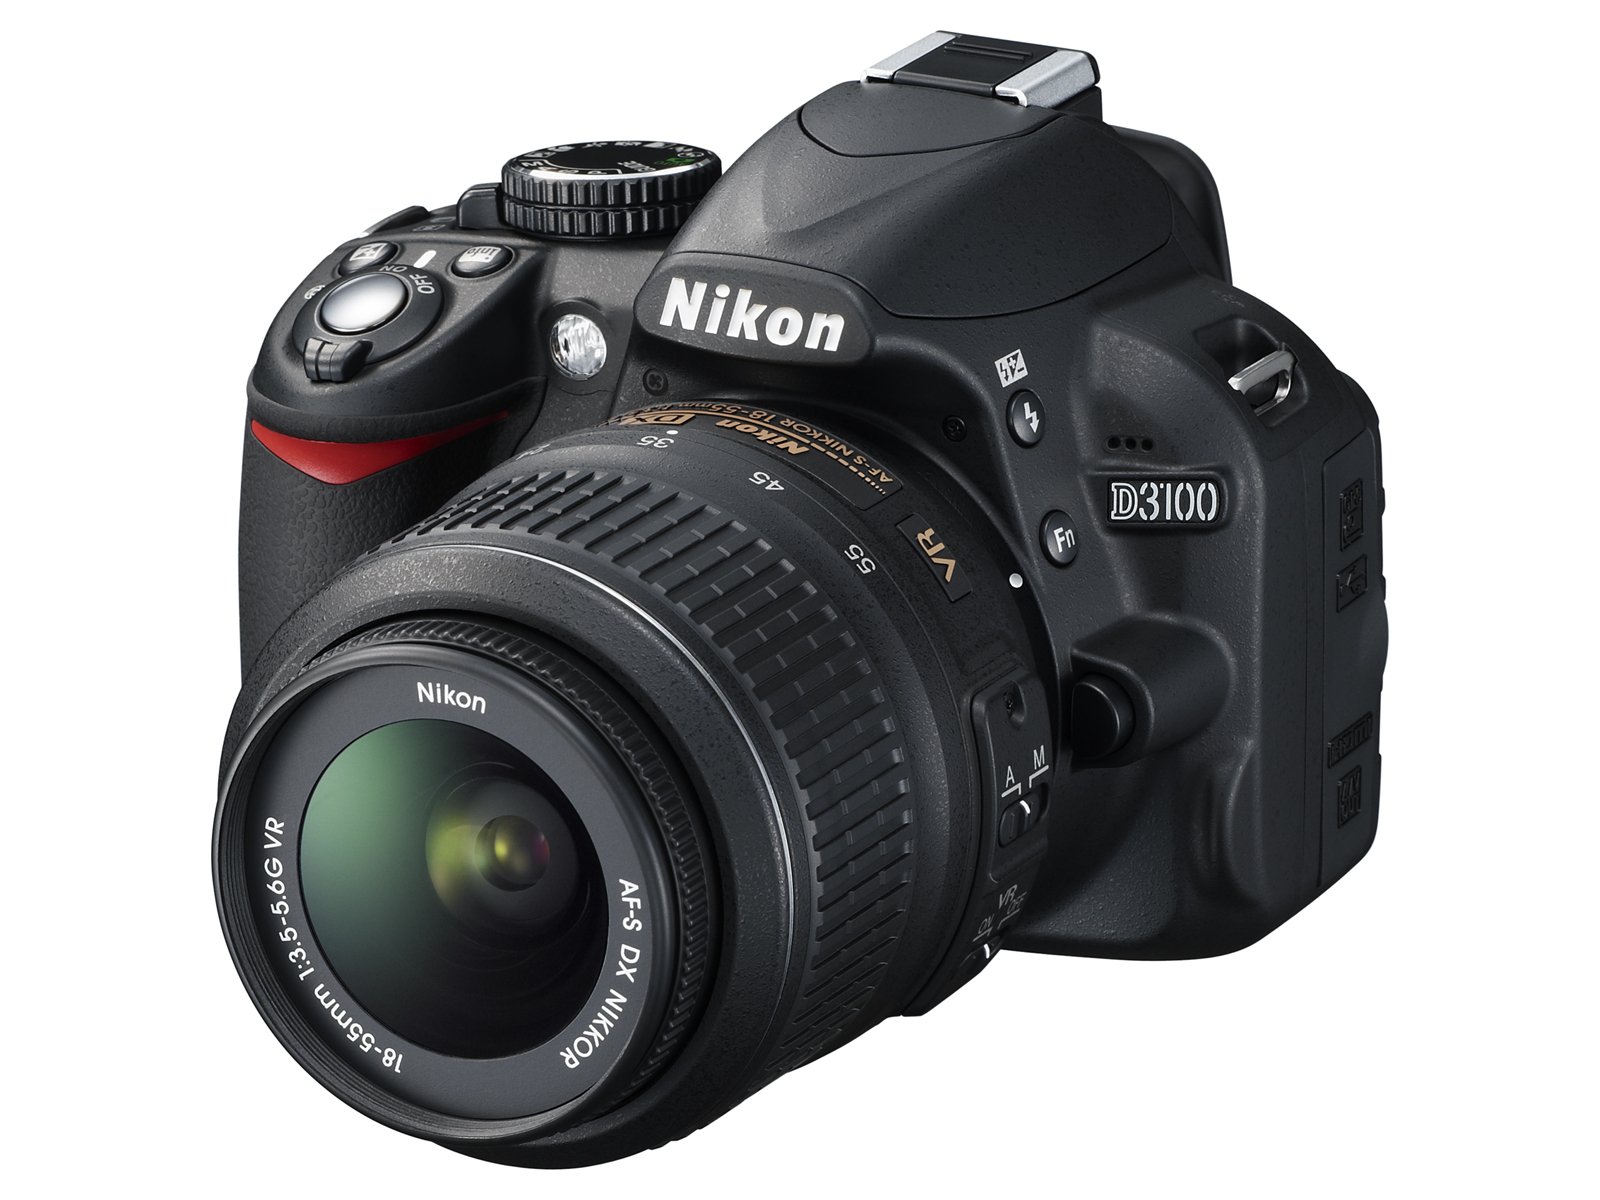 Nikon D3100 DSLR Camera with 18-55mm f/3.5-5.6 Auto Focus-S Nikkor Zoom Lens (Discontinued by Manufacturer)